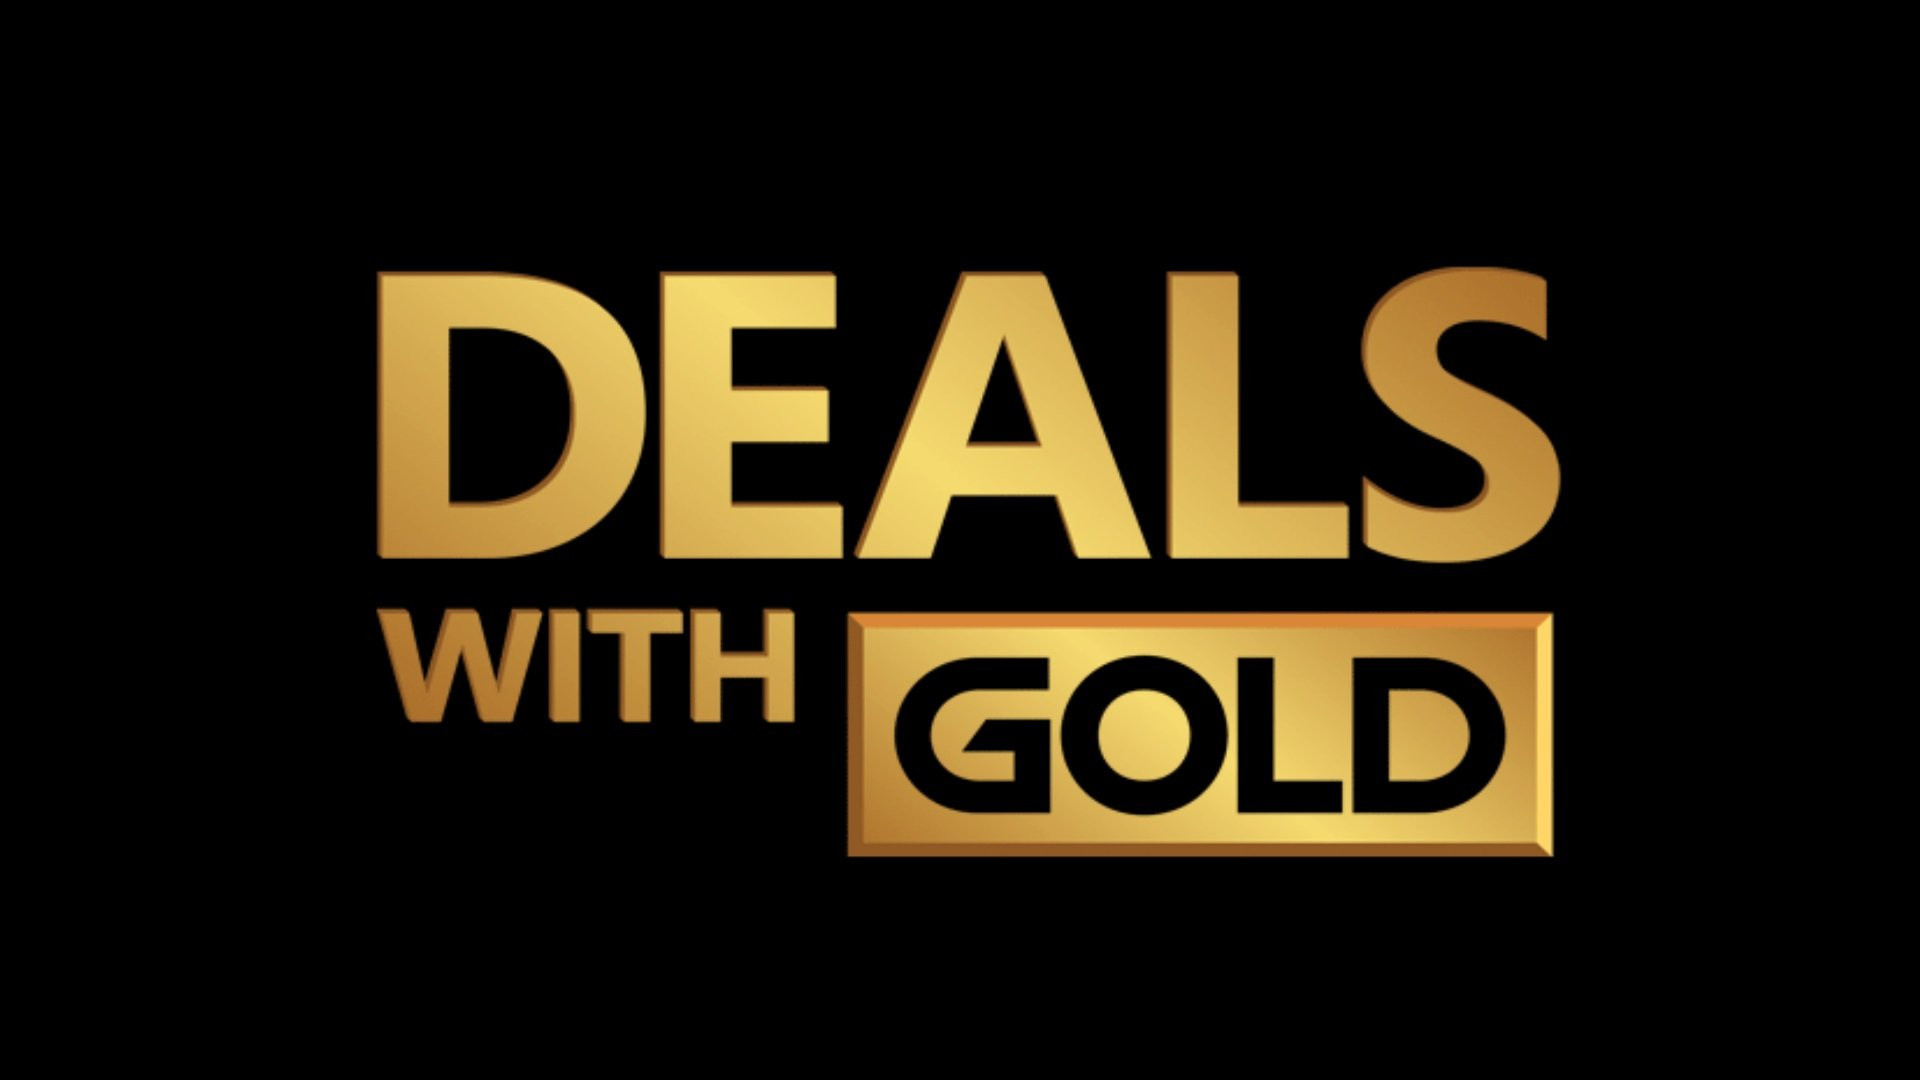 Deals with Gold semaine 35